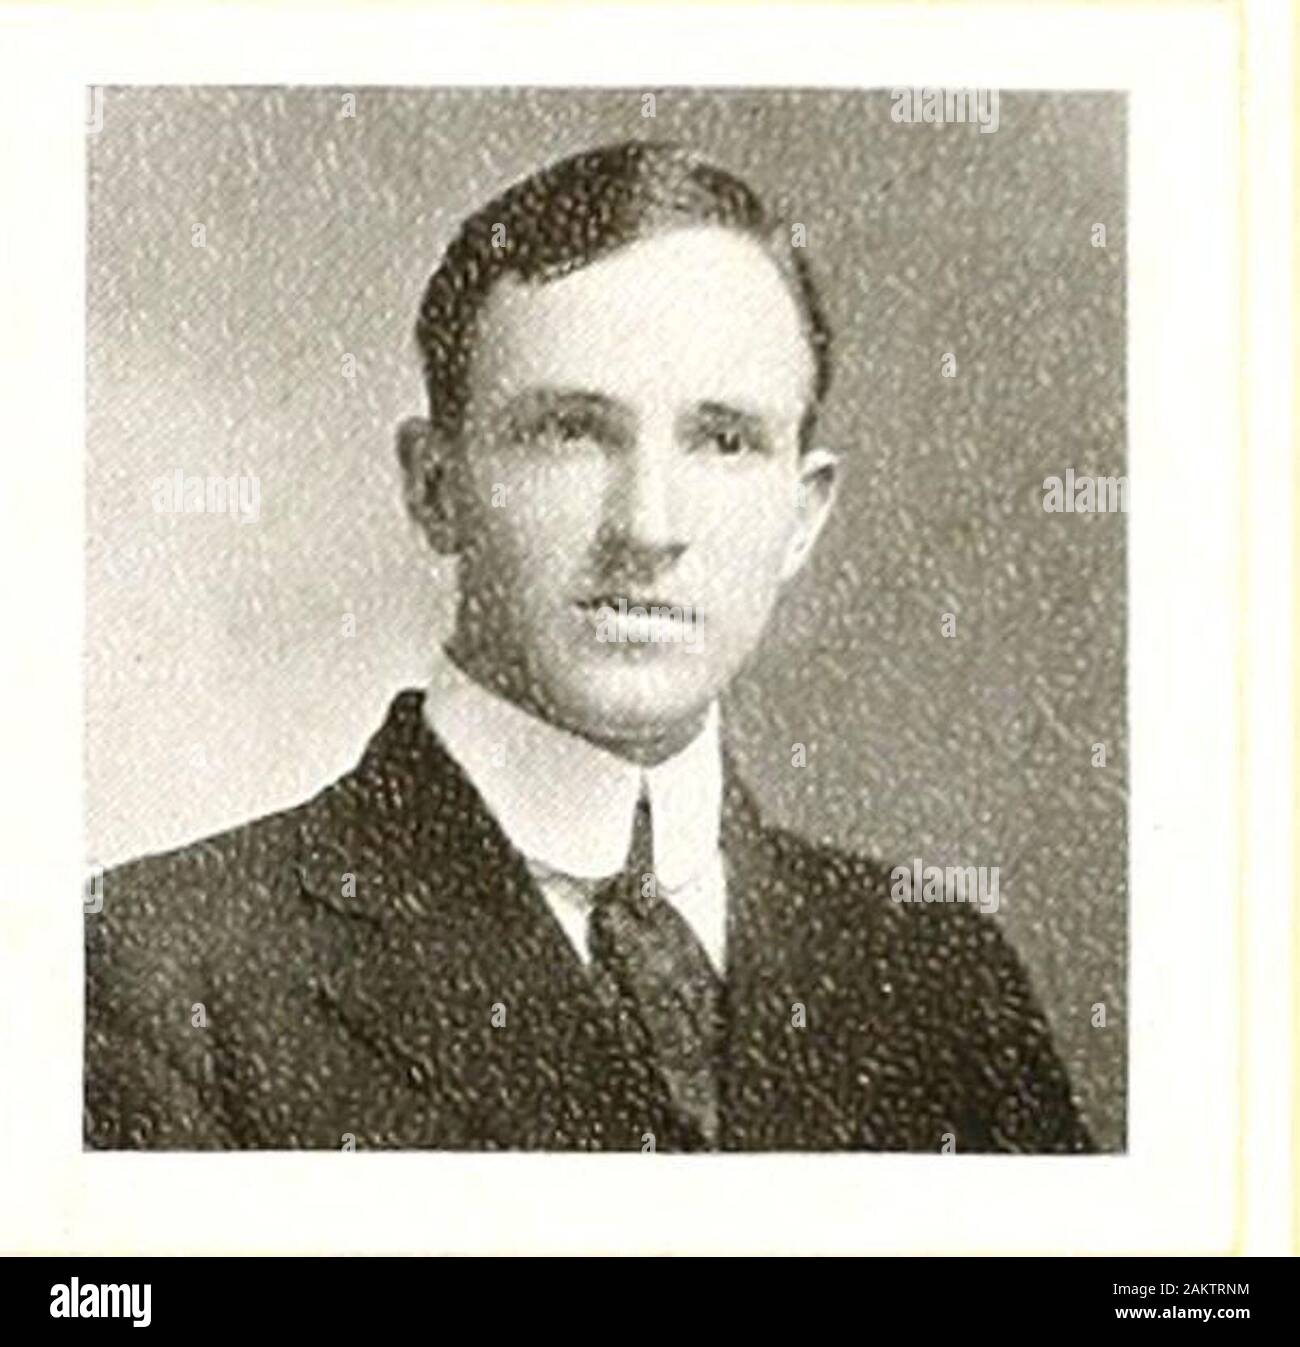 Chilhowean 1916 . Harwell B. ParkCulleoka, Tenn. Alpha Sigma General; Varsity Baseball, .*14. 15, 16; Captain VarsityBaseball, 15-16; AthleticBoard of Control, 14-15;Vice-President of the Ath-letic Board of Control. 15-16; Assistant AdvertisingManager of Chilhowean,16. Stock Photo